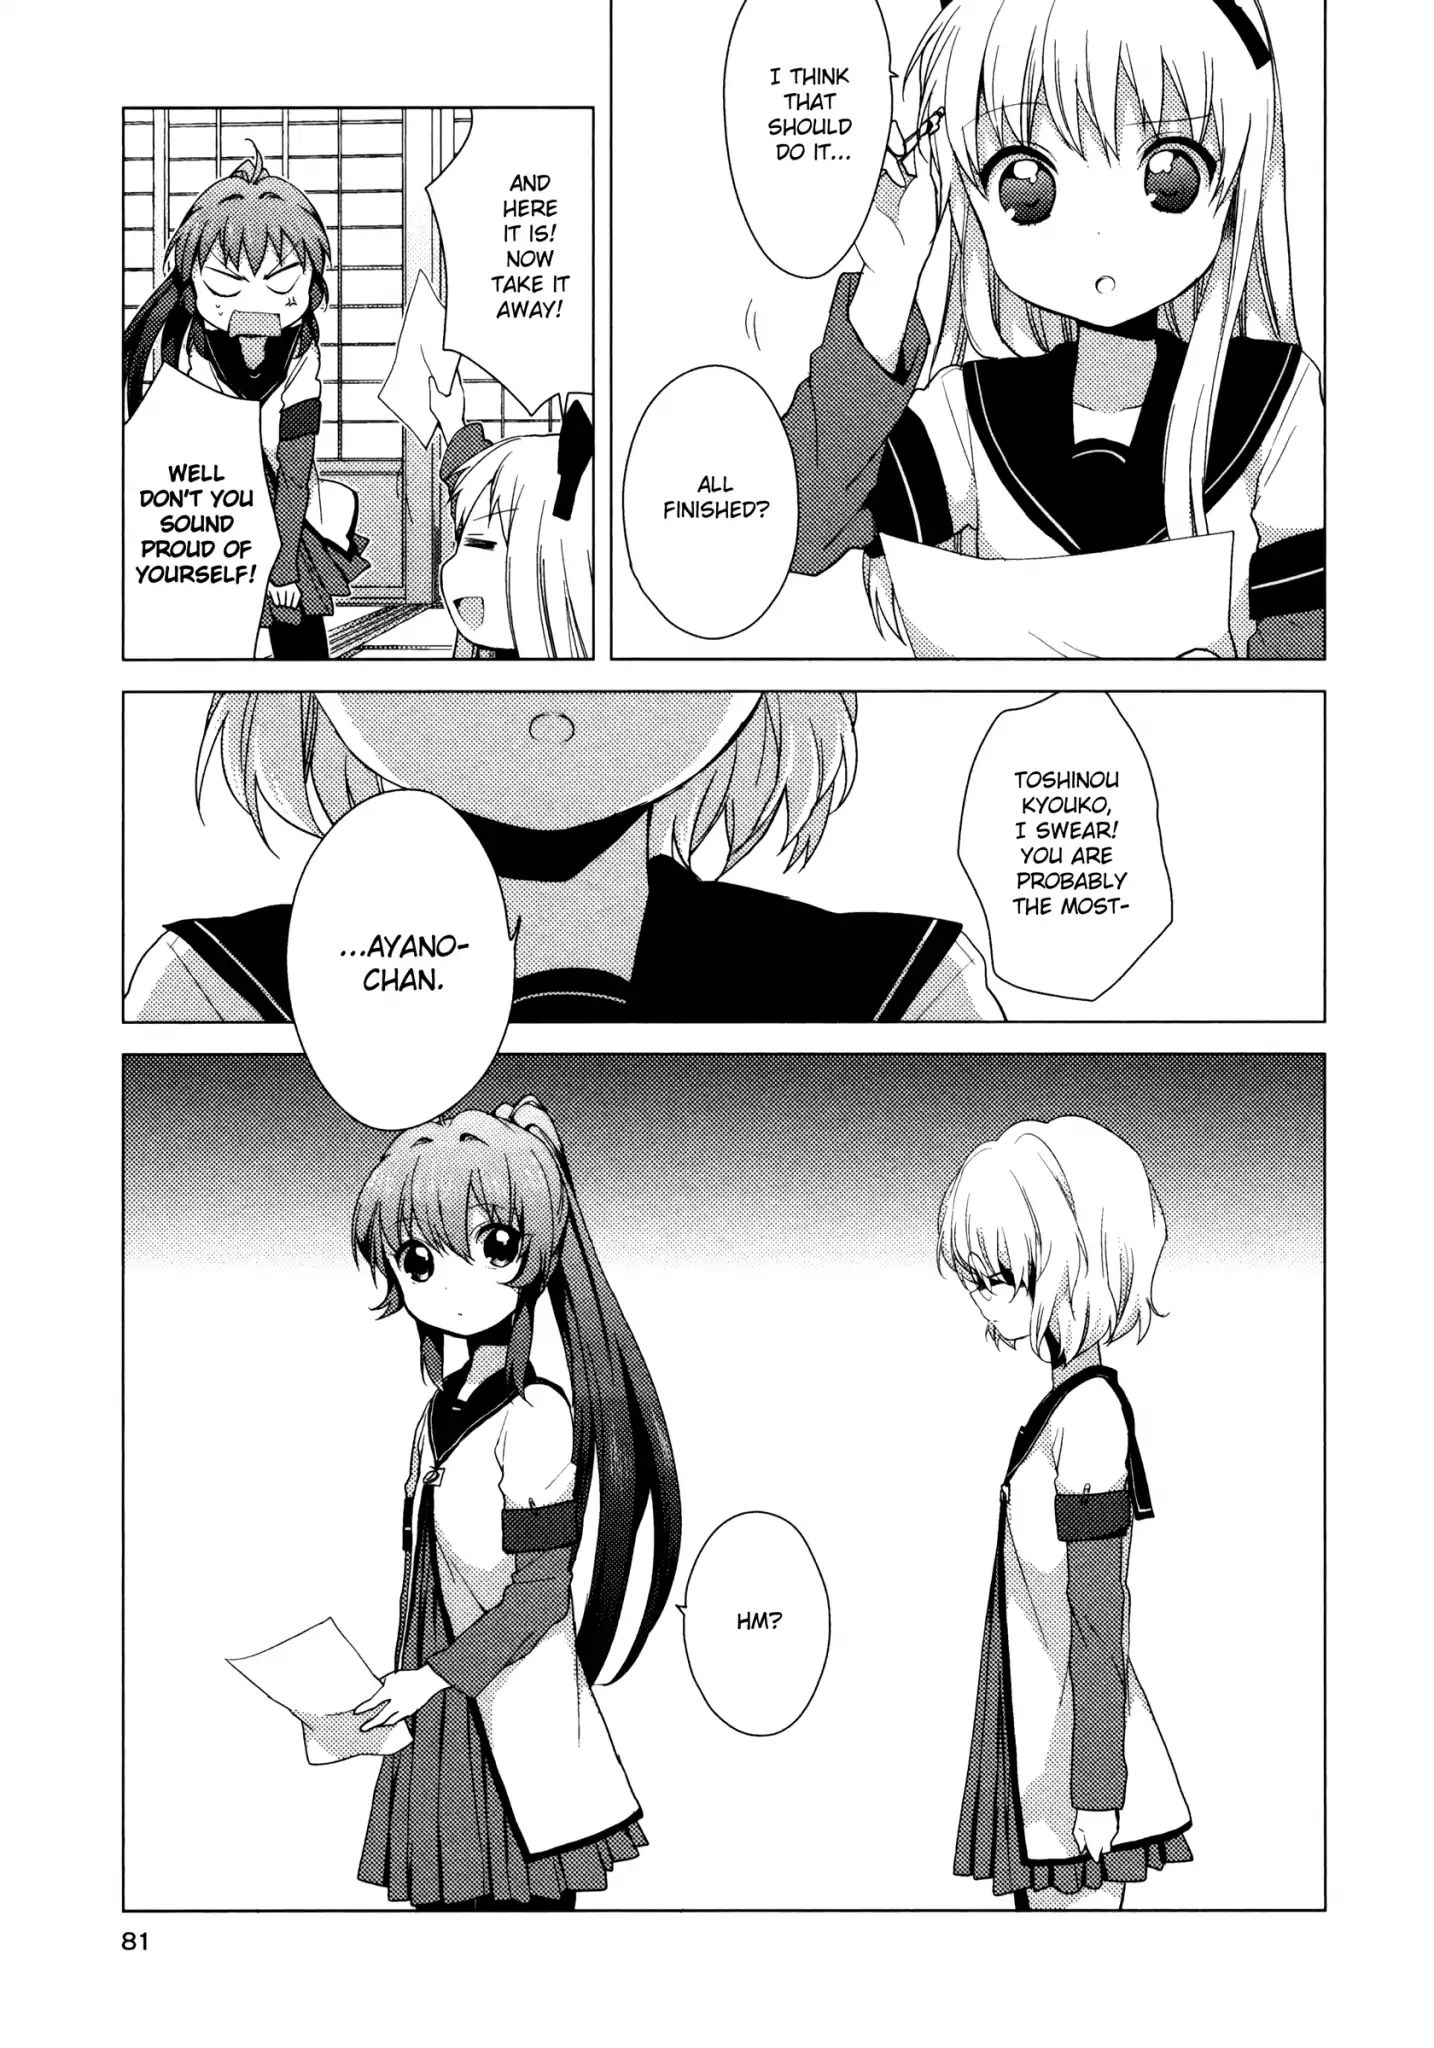 Yuru Yuri Vol.4 Chapter 38: Alcohol And Tears, Girls And Girls - Picture 3